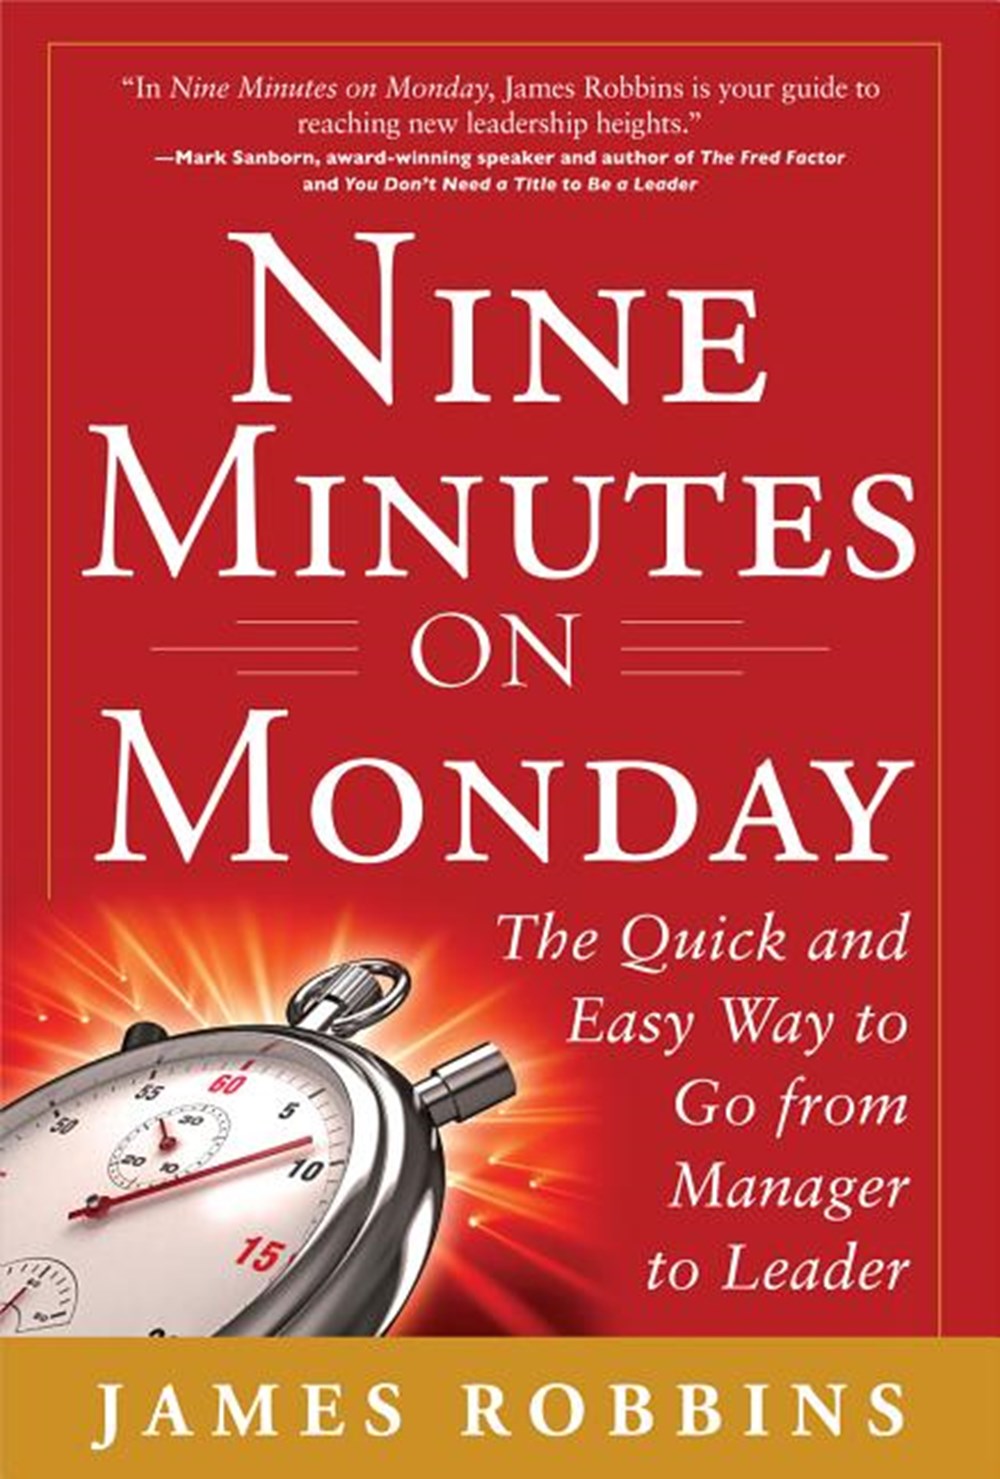 Nine Minutes on Monday The Quick and Easy Way to Go from Manager to Leader